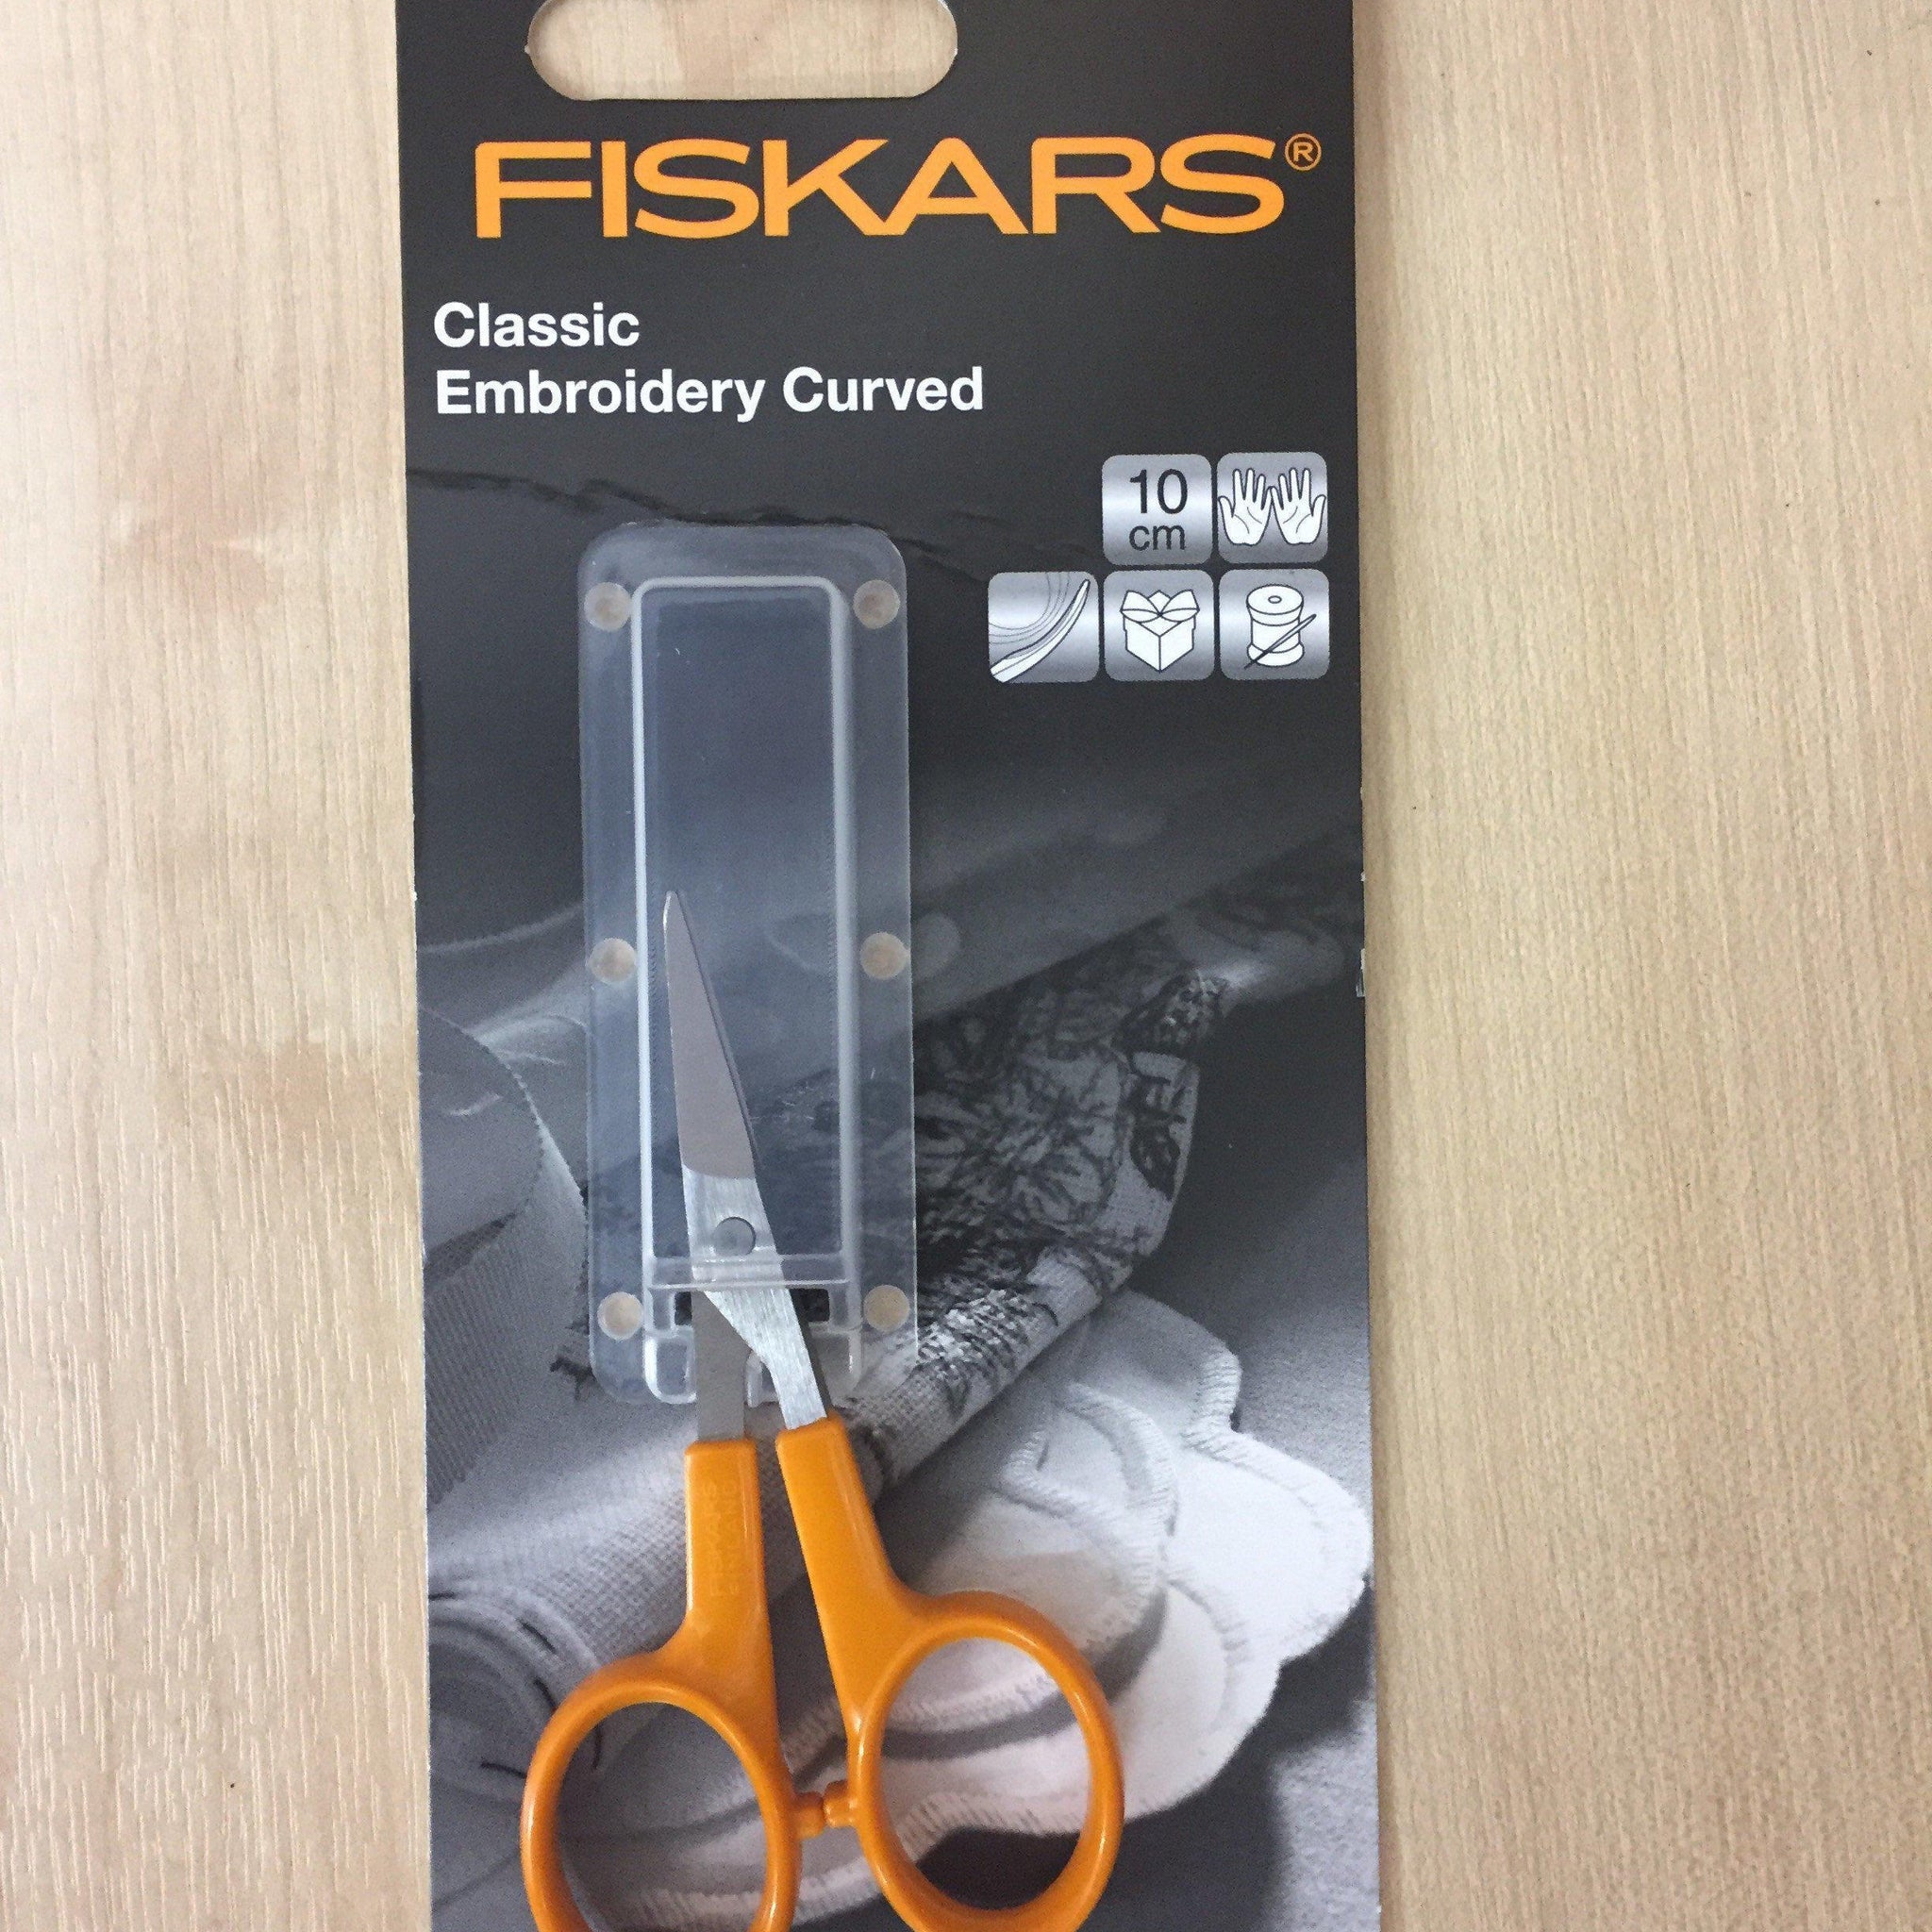 Fiskars Classic Embroidery Scissors Curved 10cm fabricmouse Measuring Tools and Cutting - Fabric Mouse